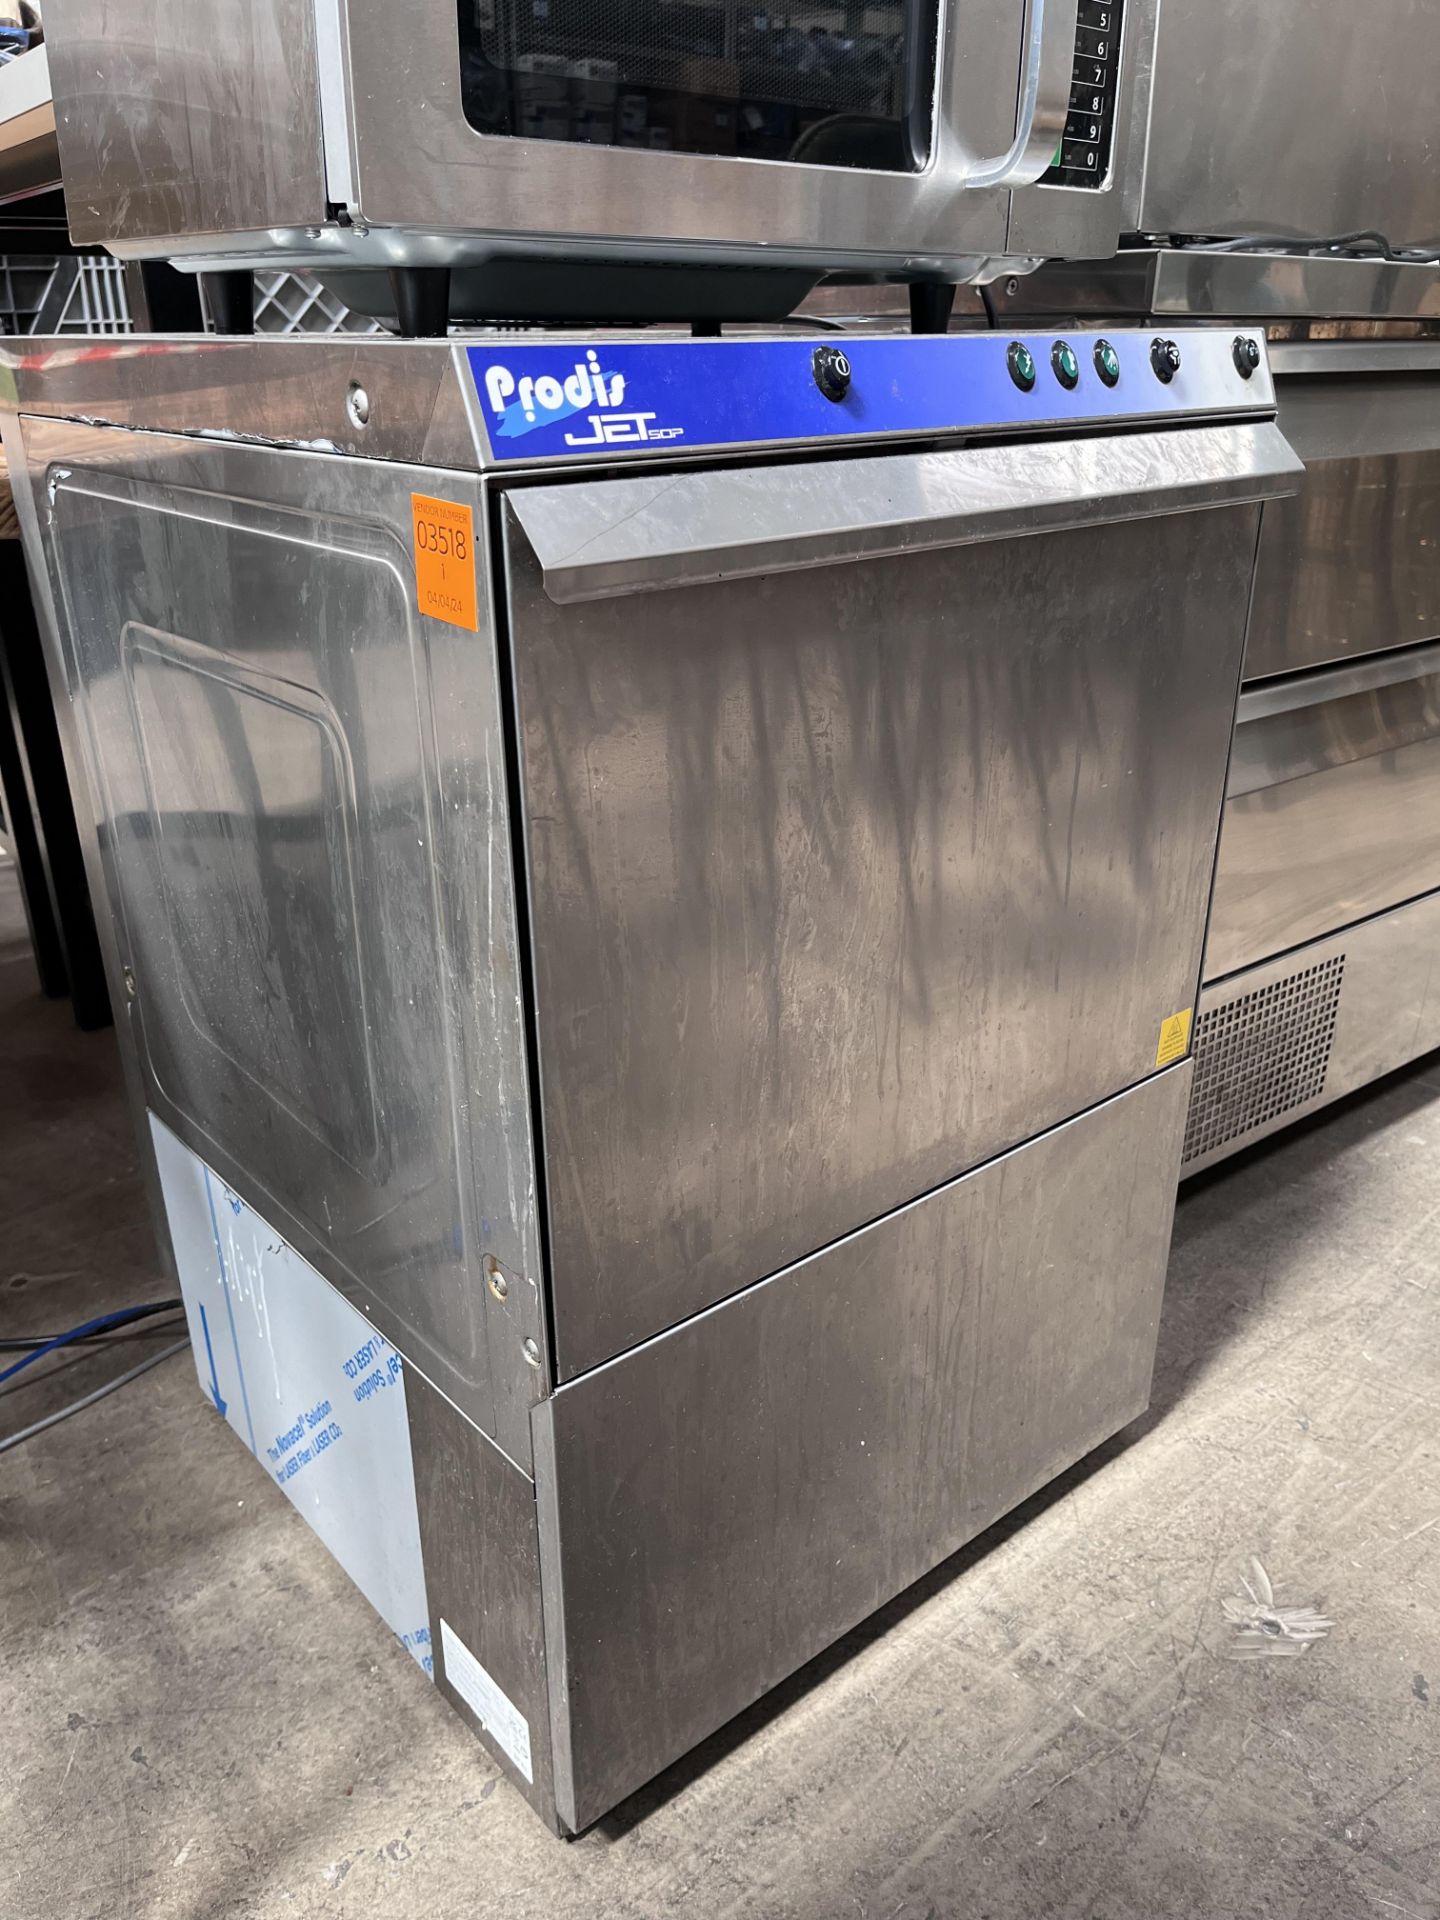 Prodis Jet50P stainless steel under counter glass washer - Image 2 of 4